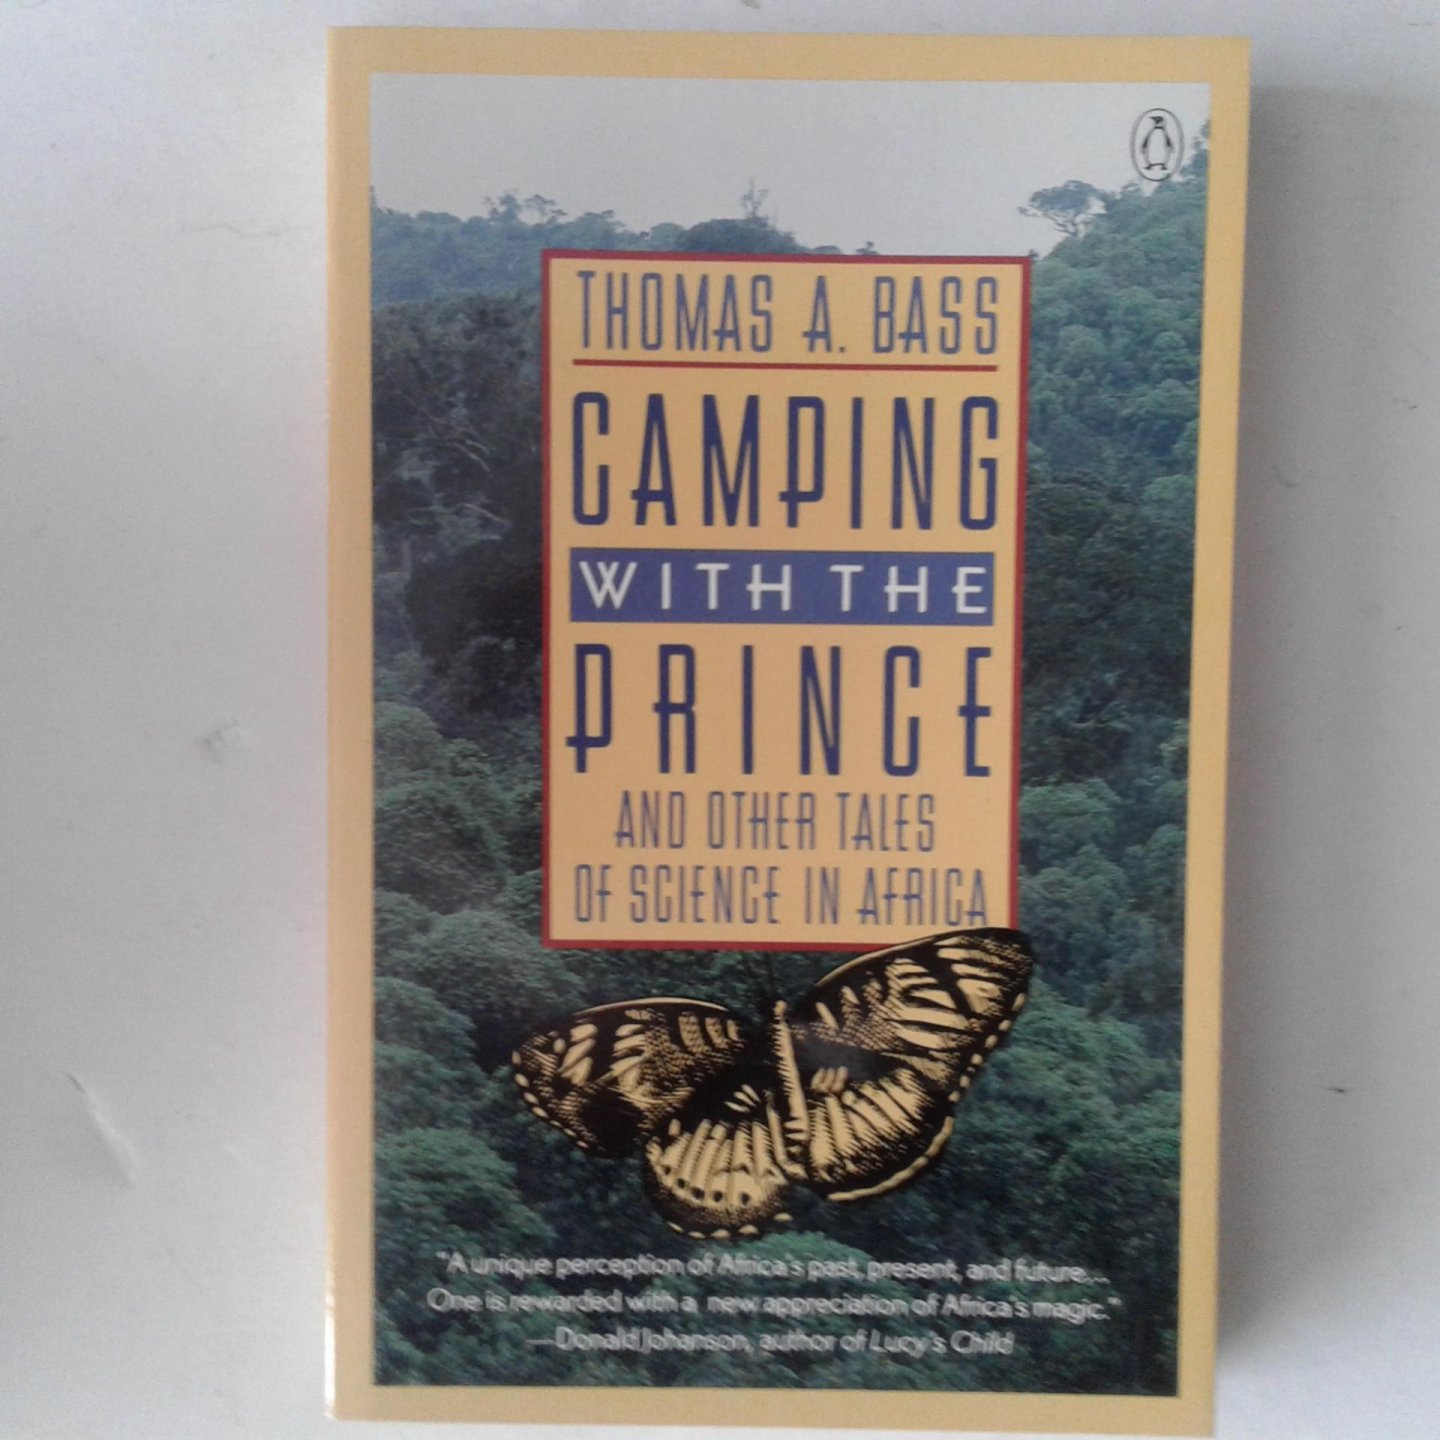 Bass, Thomas A. - Camping with the Prince and Other Tales of Science in Africa